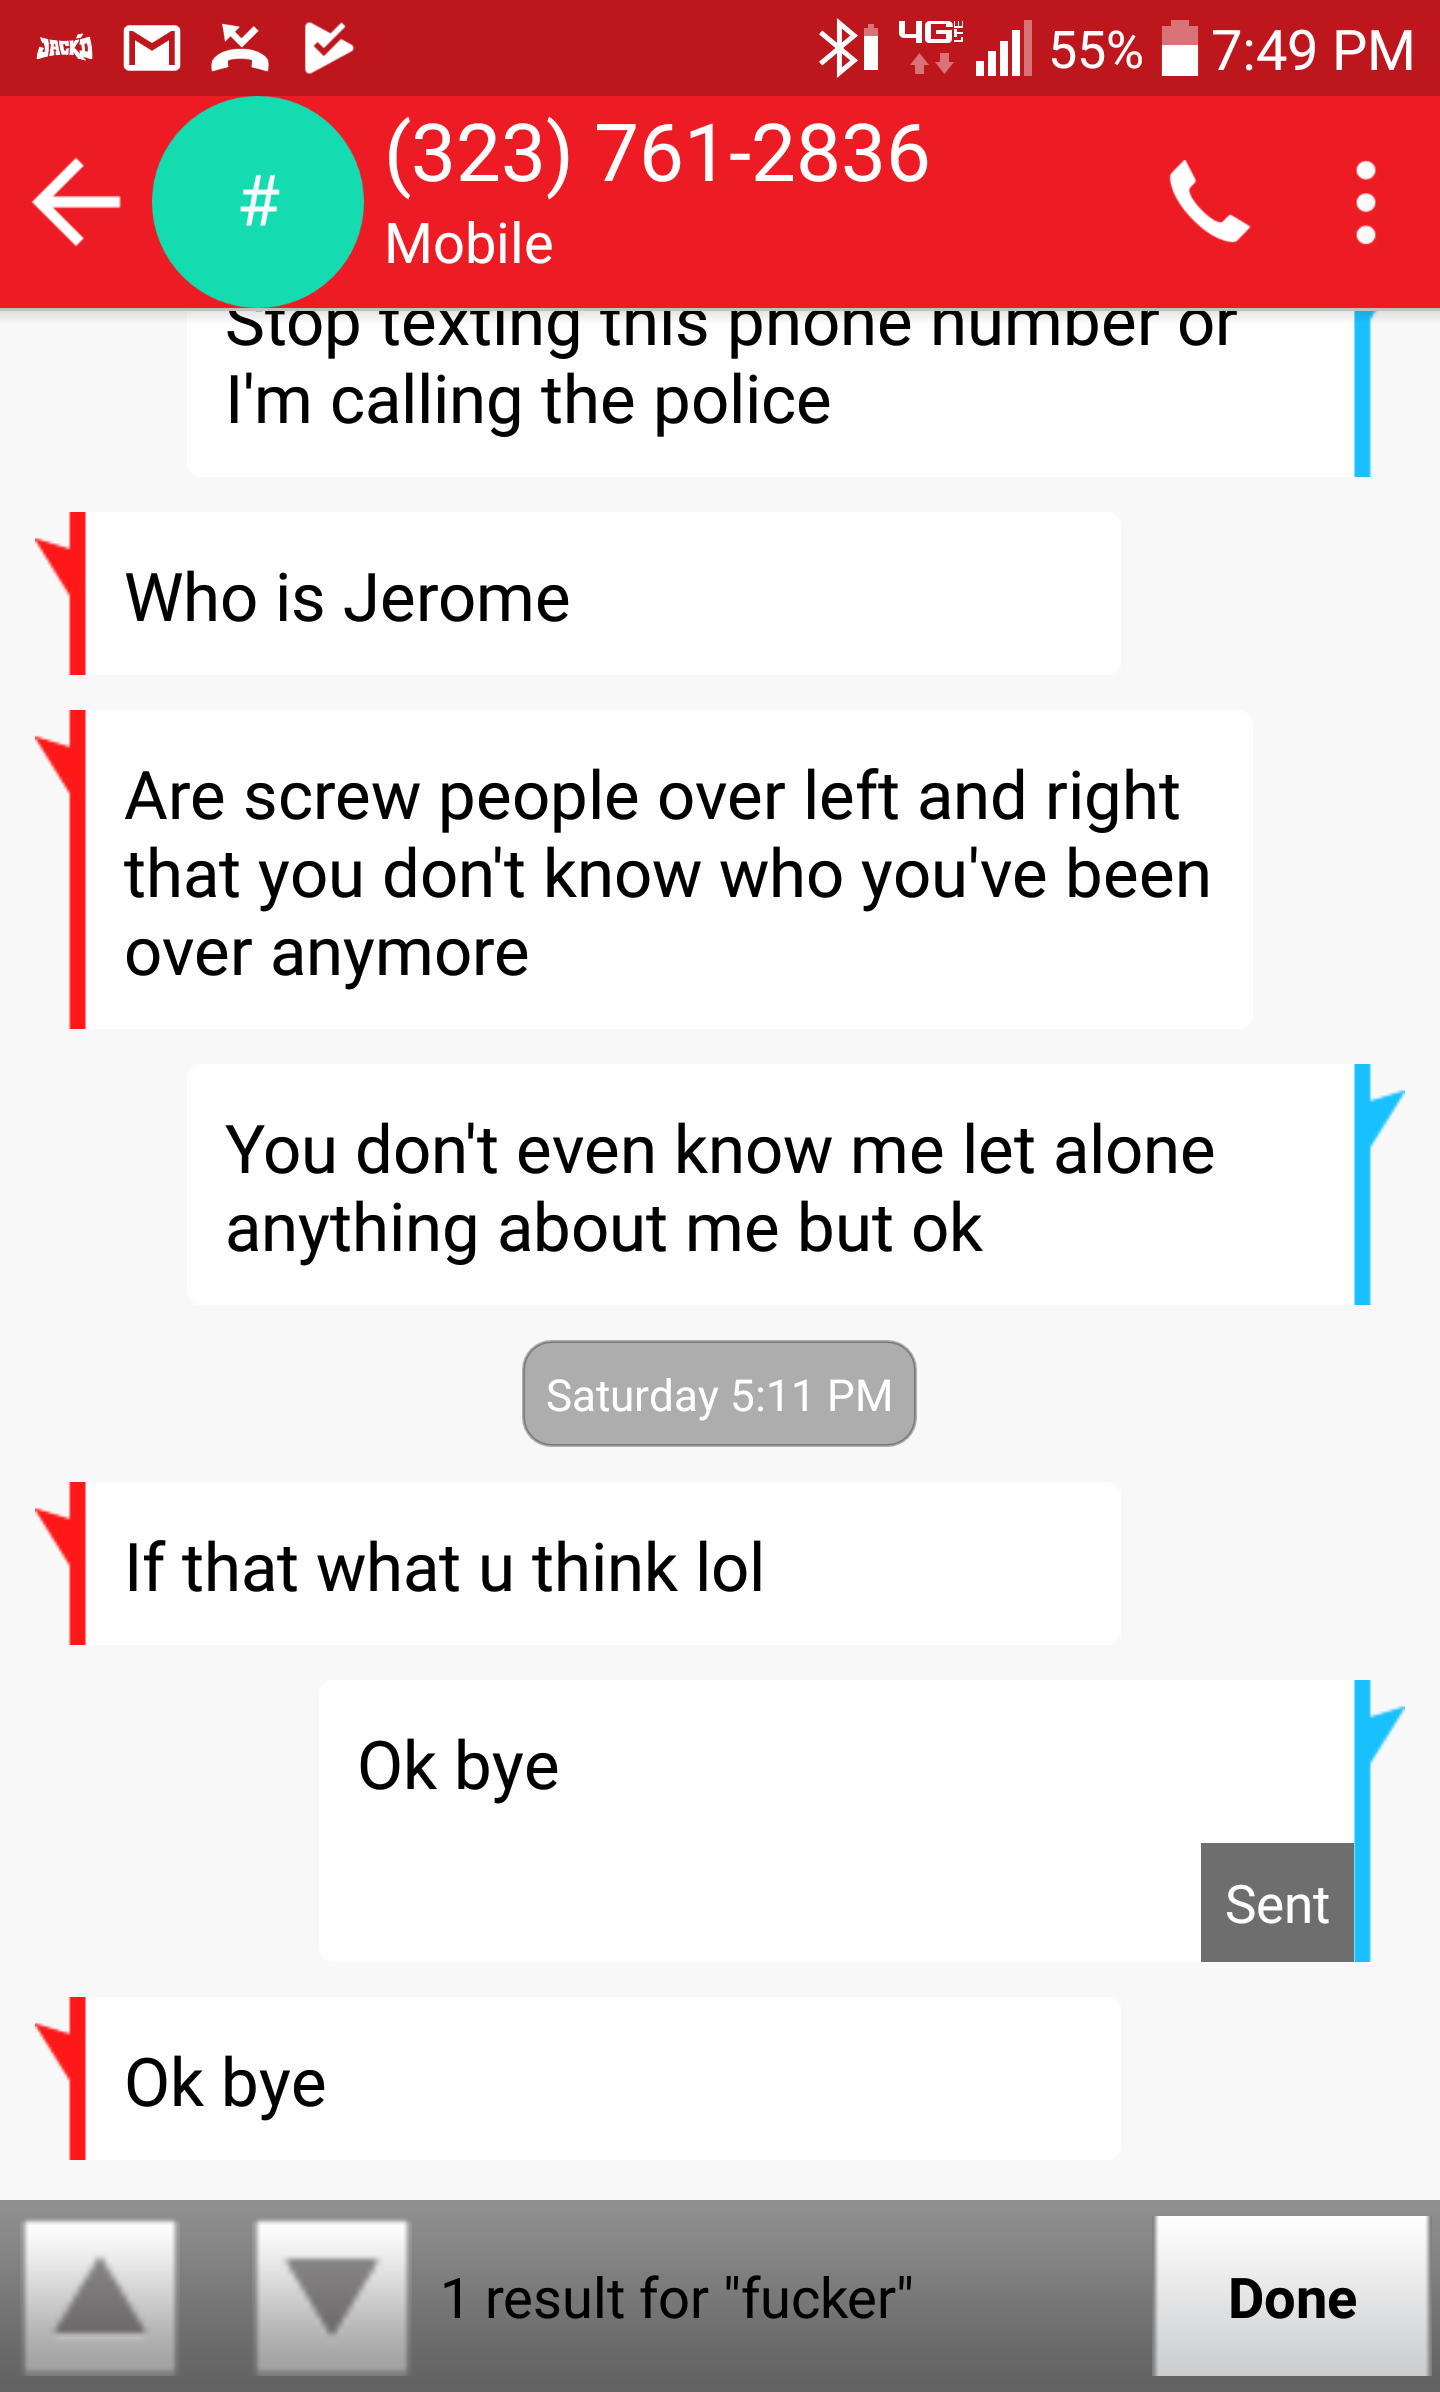 Jerome Nisbett ‘s text messages are released + confession [Photos]